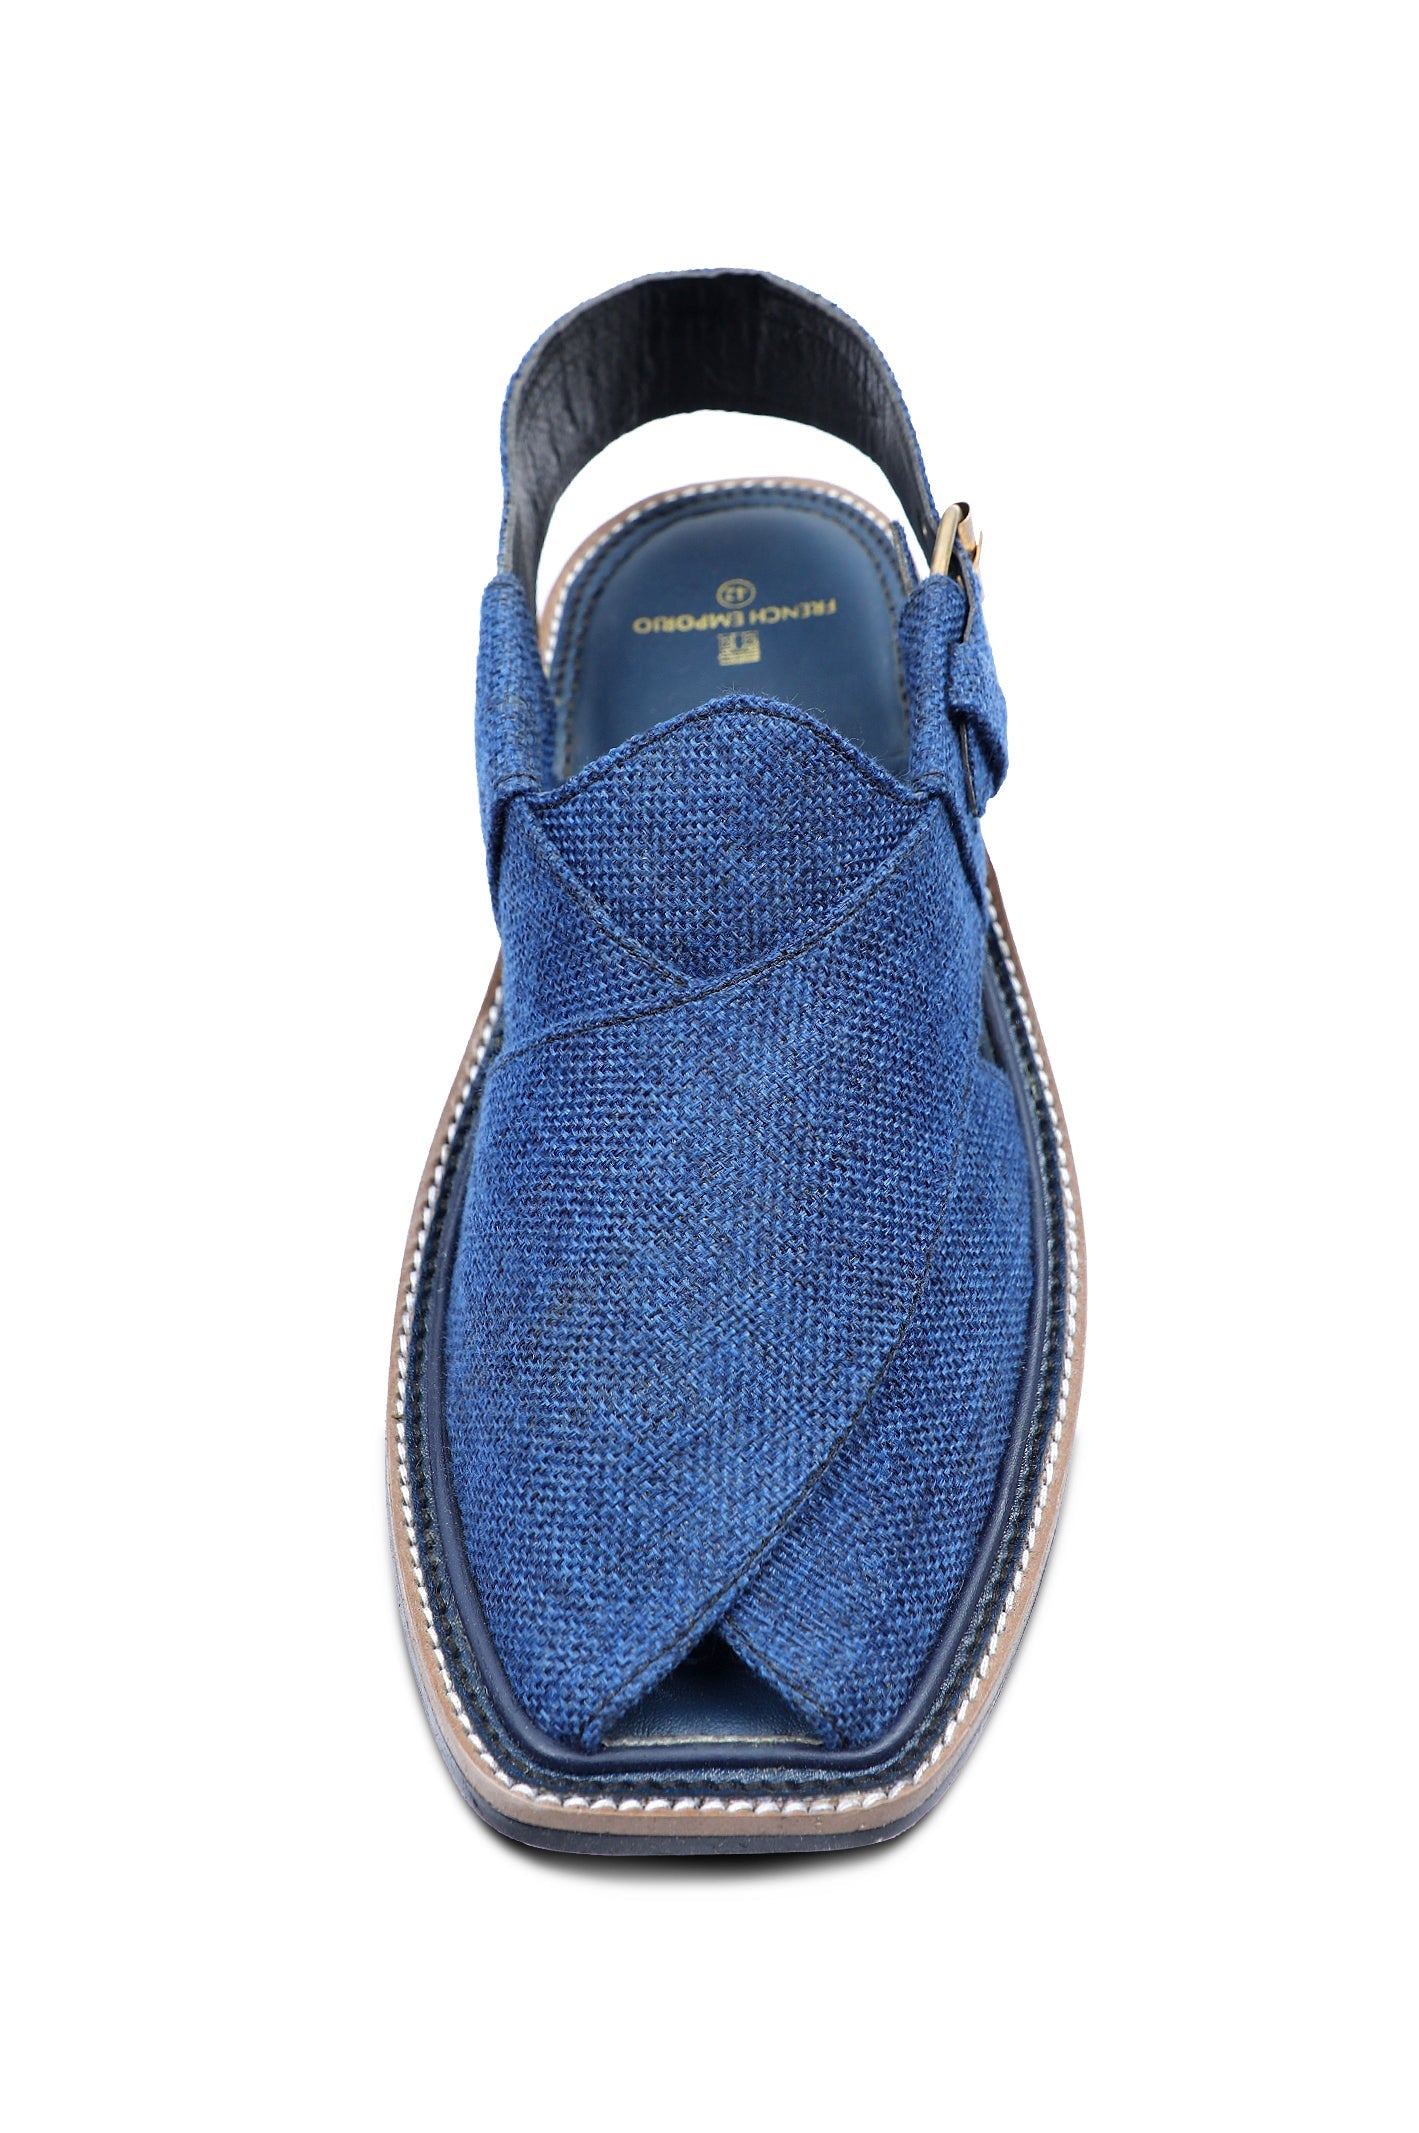 French Emporio Men Sandals SKU: PSLD-0049-BLUE - Diners